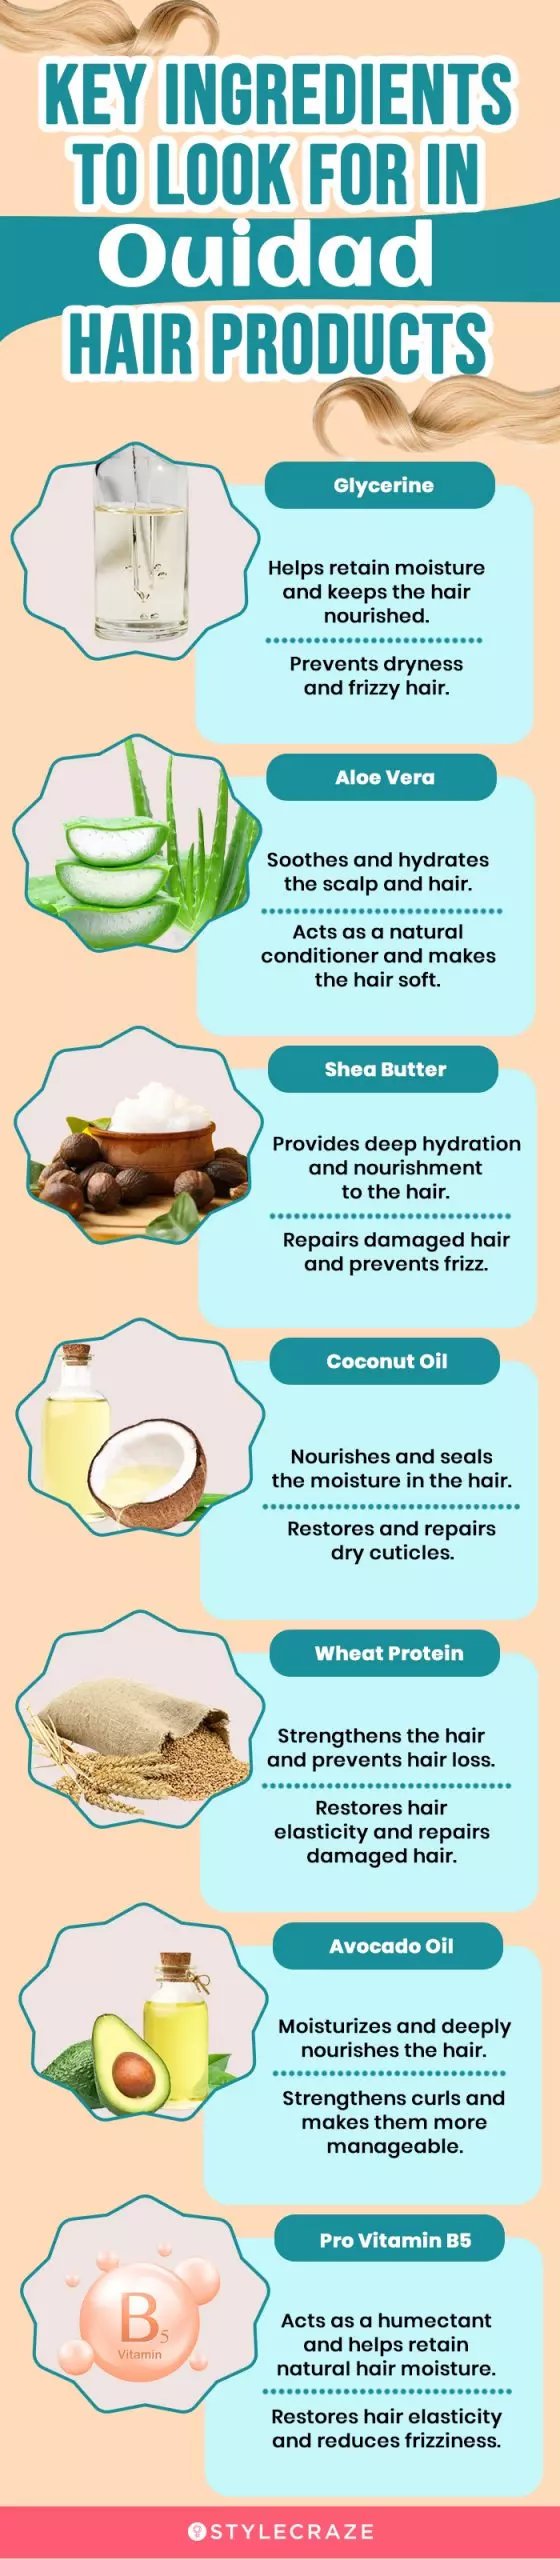 Key Ingredients To Look For In Ouidad Hair Products(infographic)